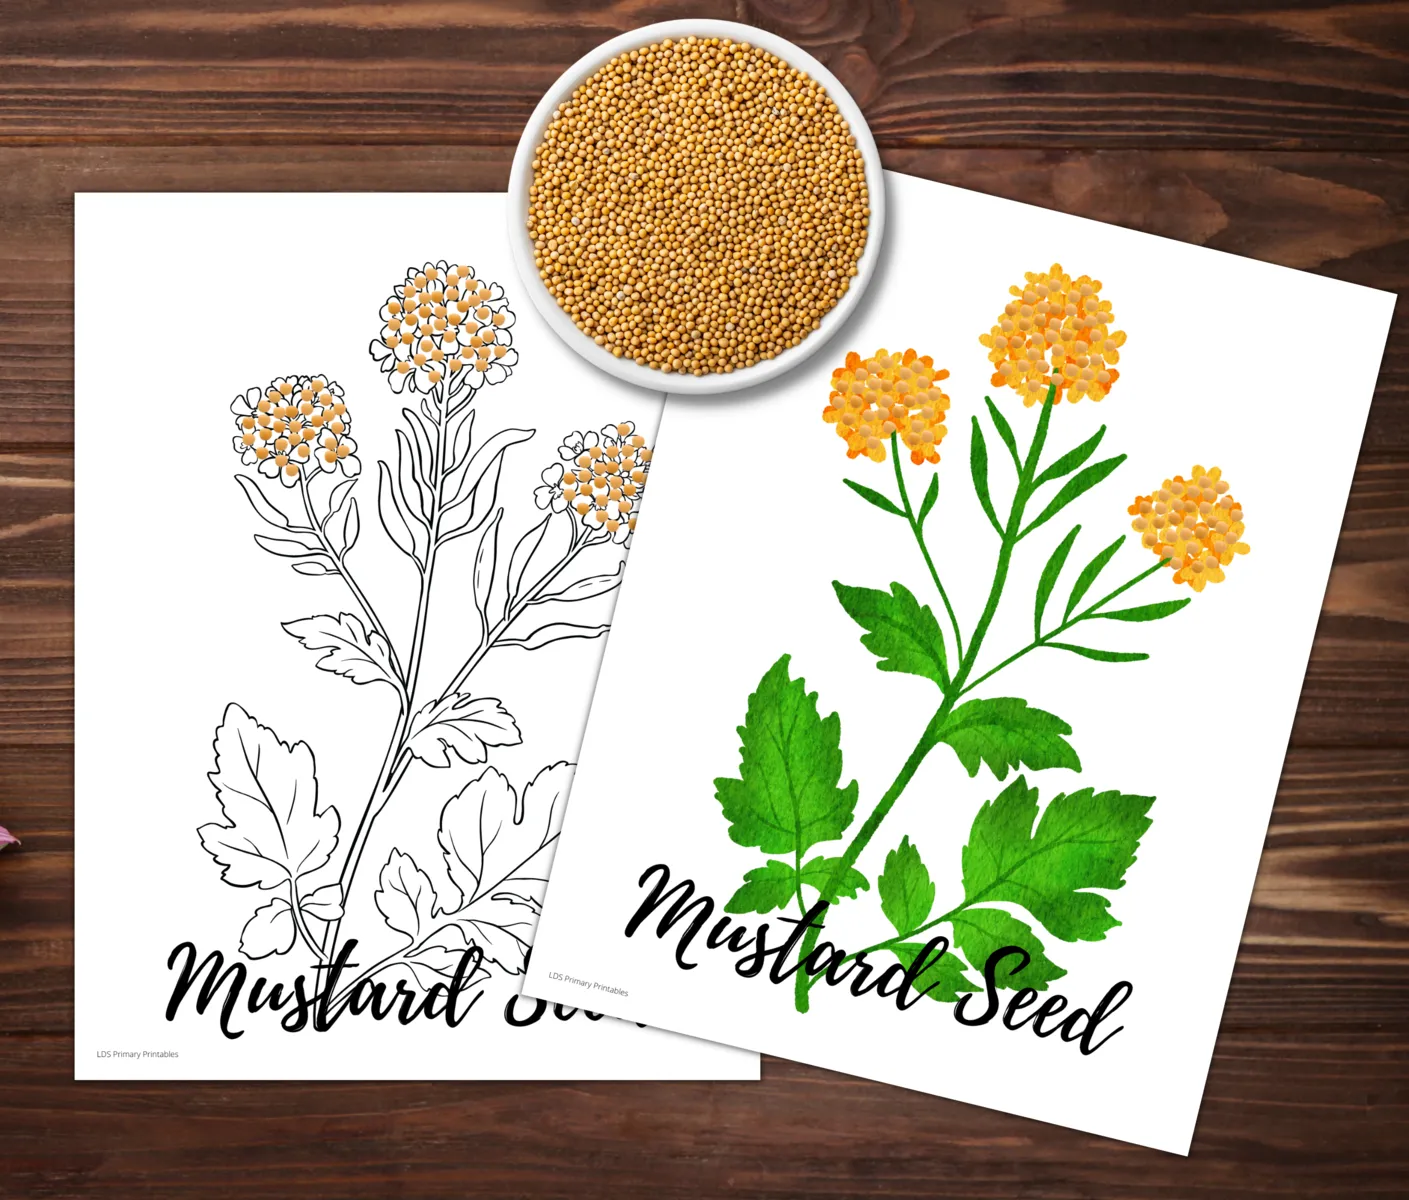 parable of mustard seed and leaven matthew mark bible kids printables